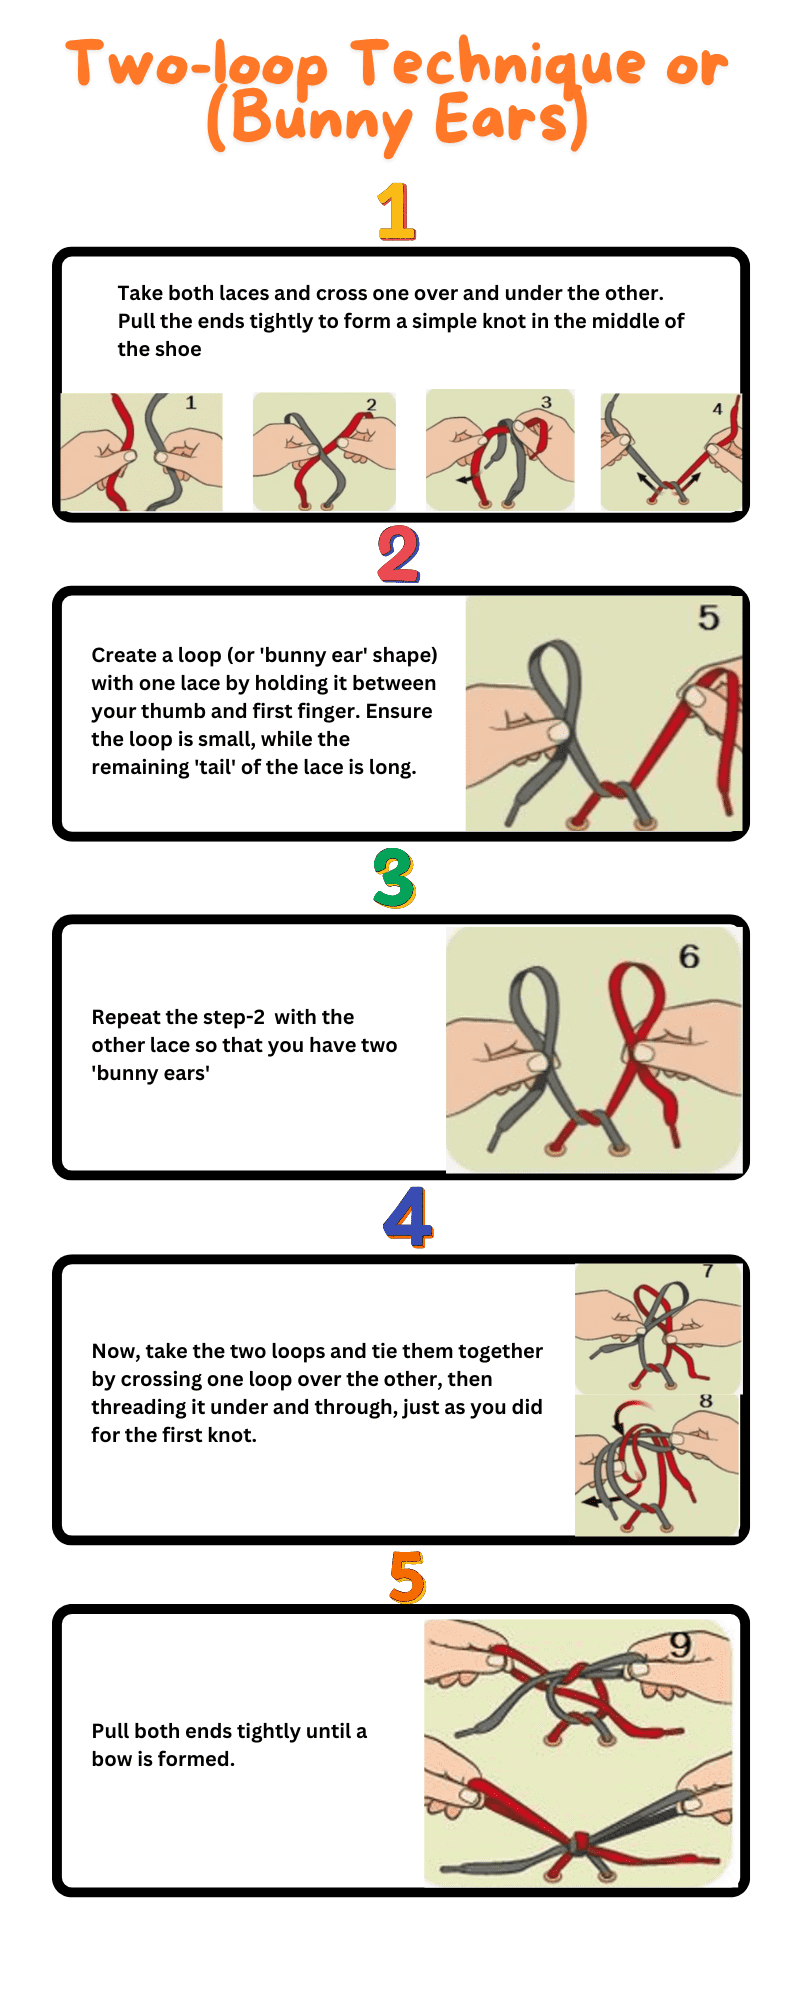 how-to-tie-shoelace-by-using-bunny-ears-technique